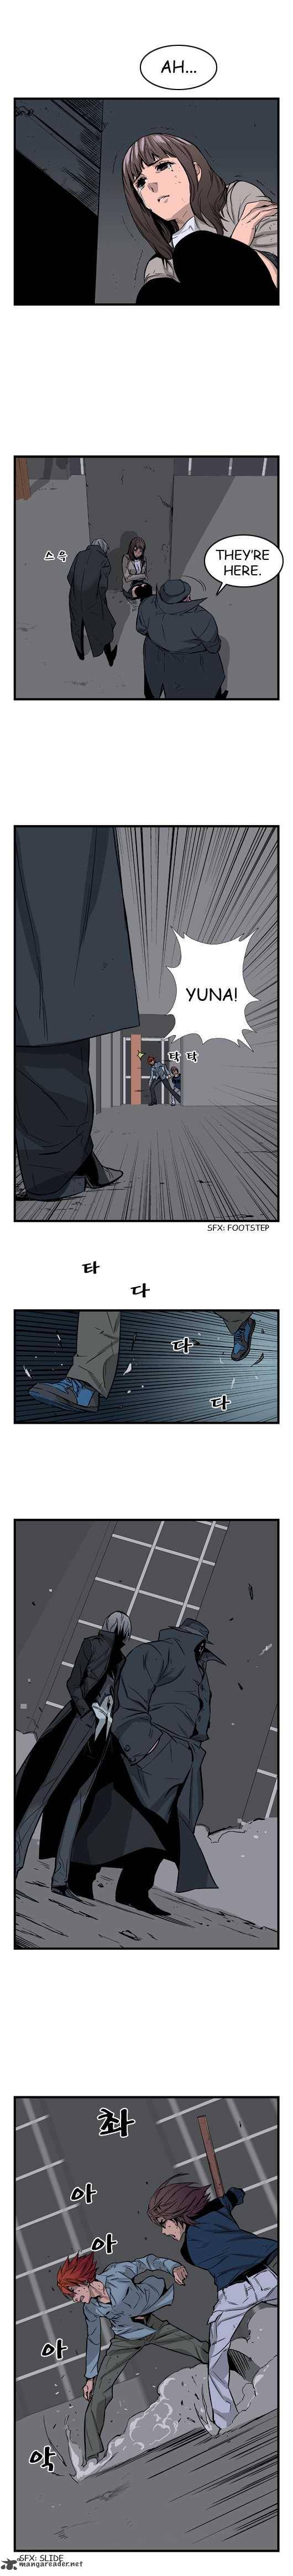 Noblesse 28 4